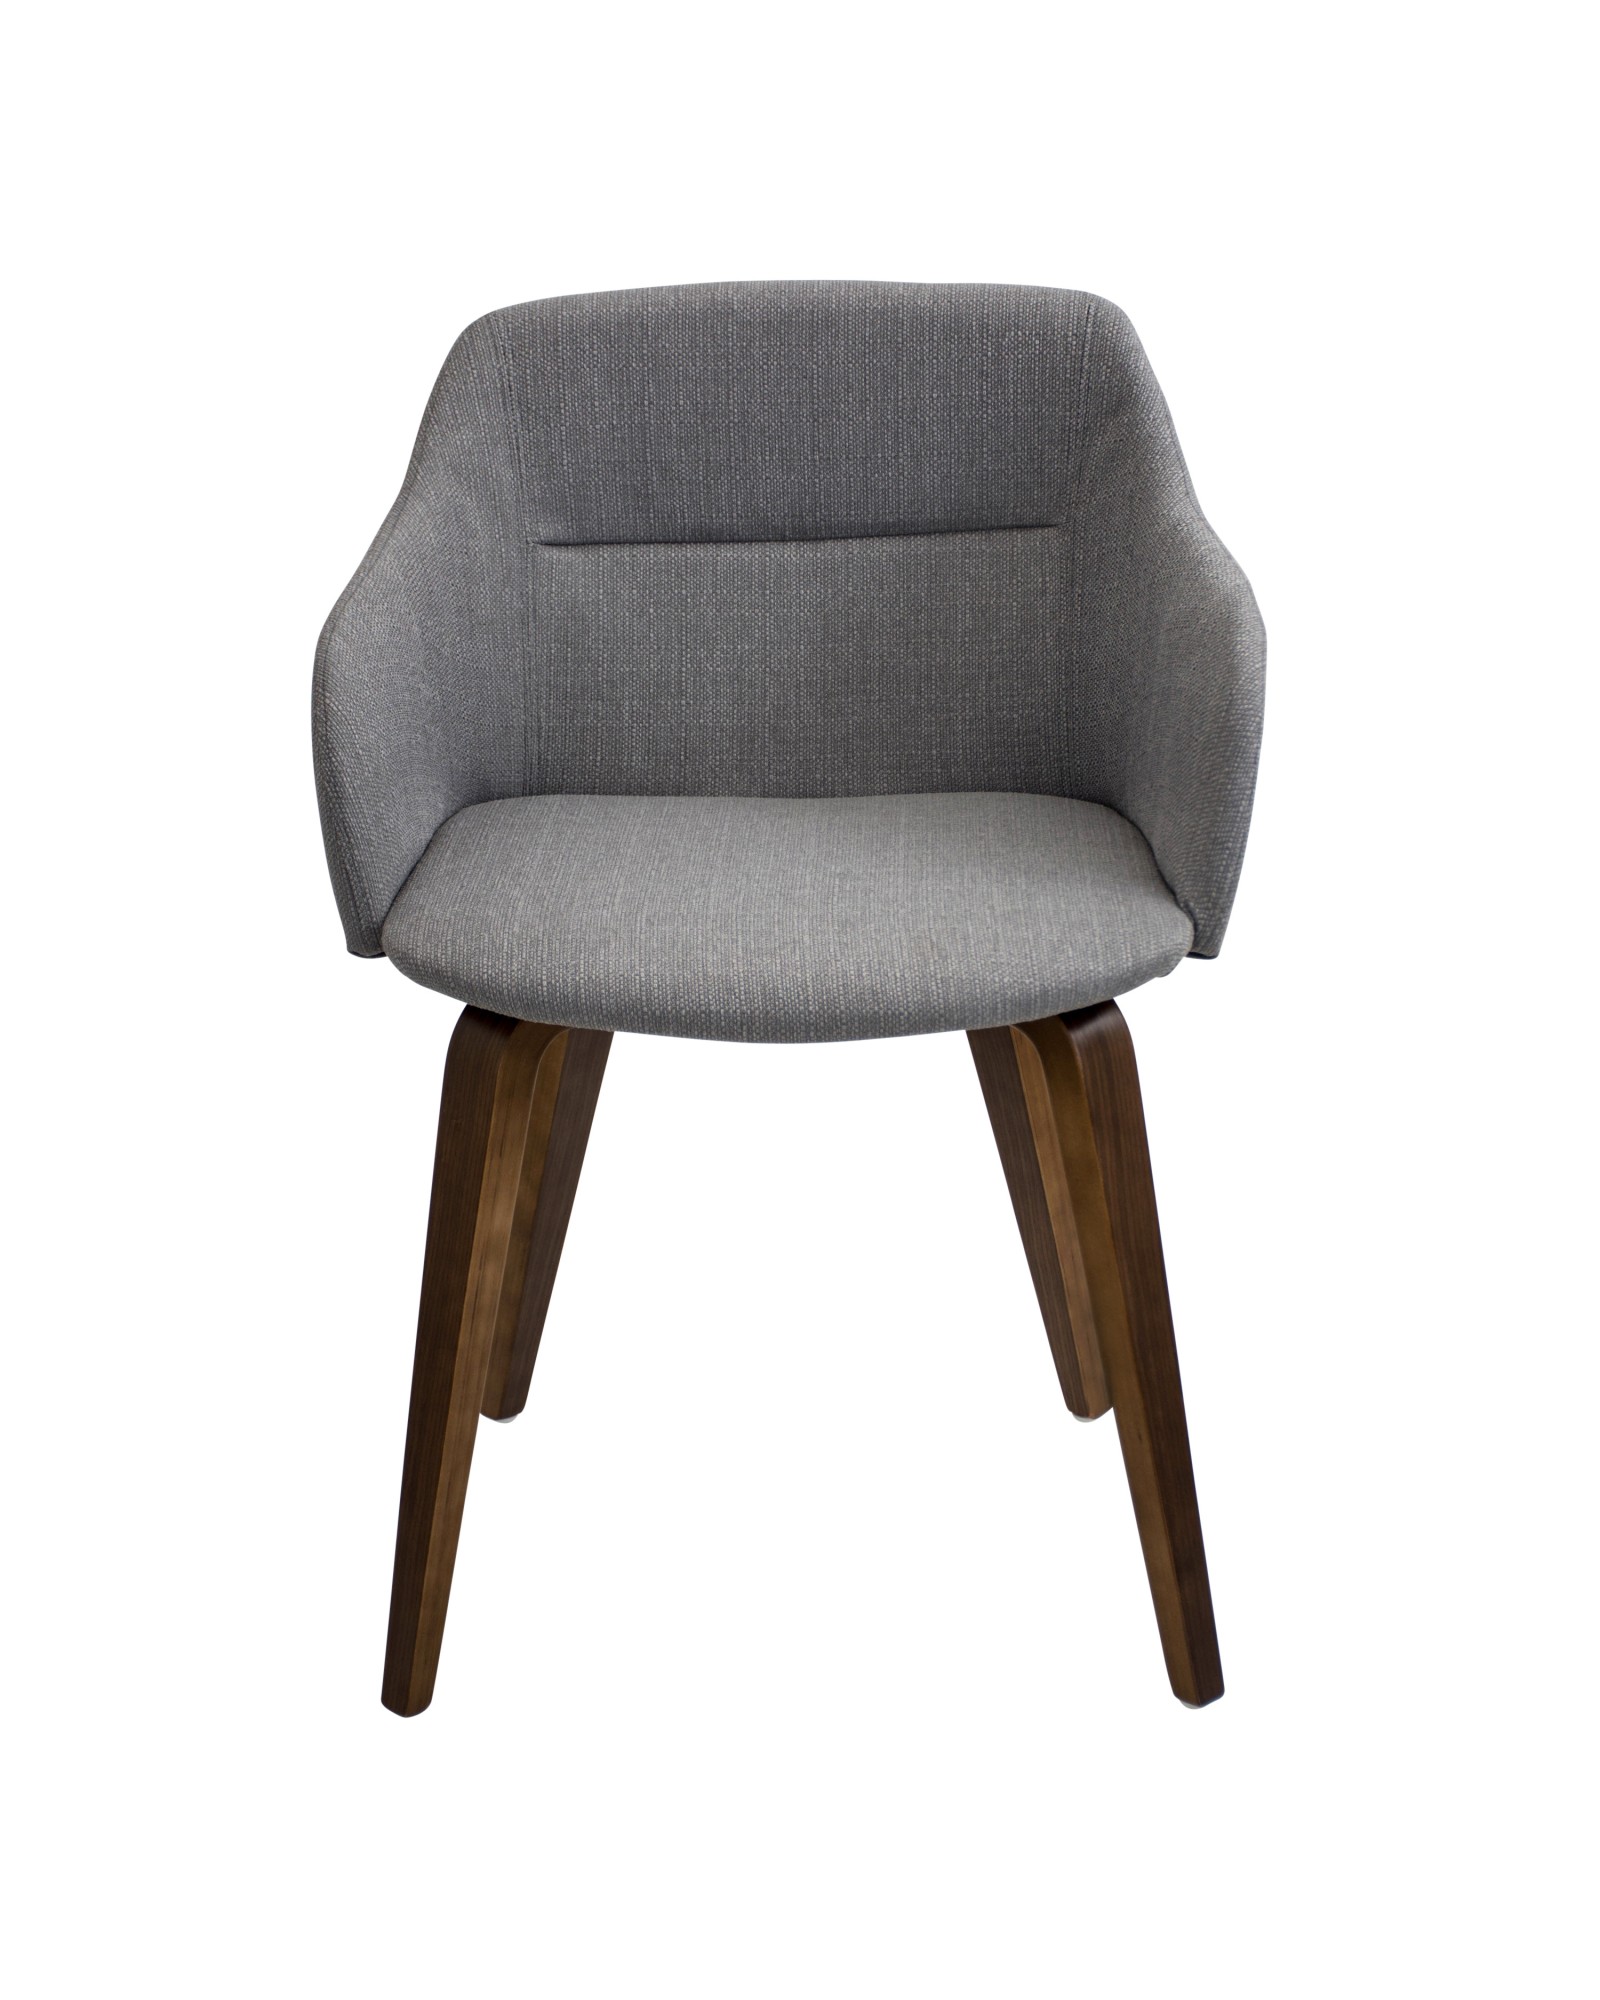 Campania Mid-Century Modern Dining/Accent Chair in Walnut and Grey